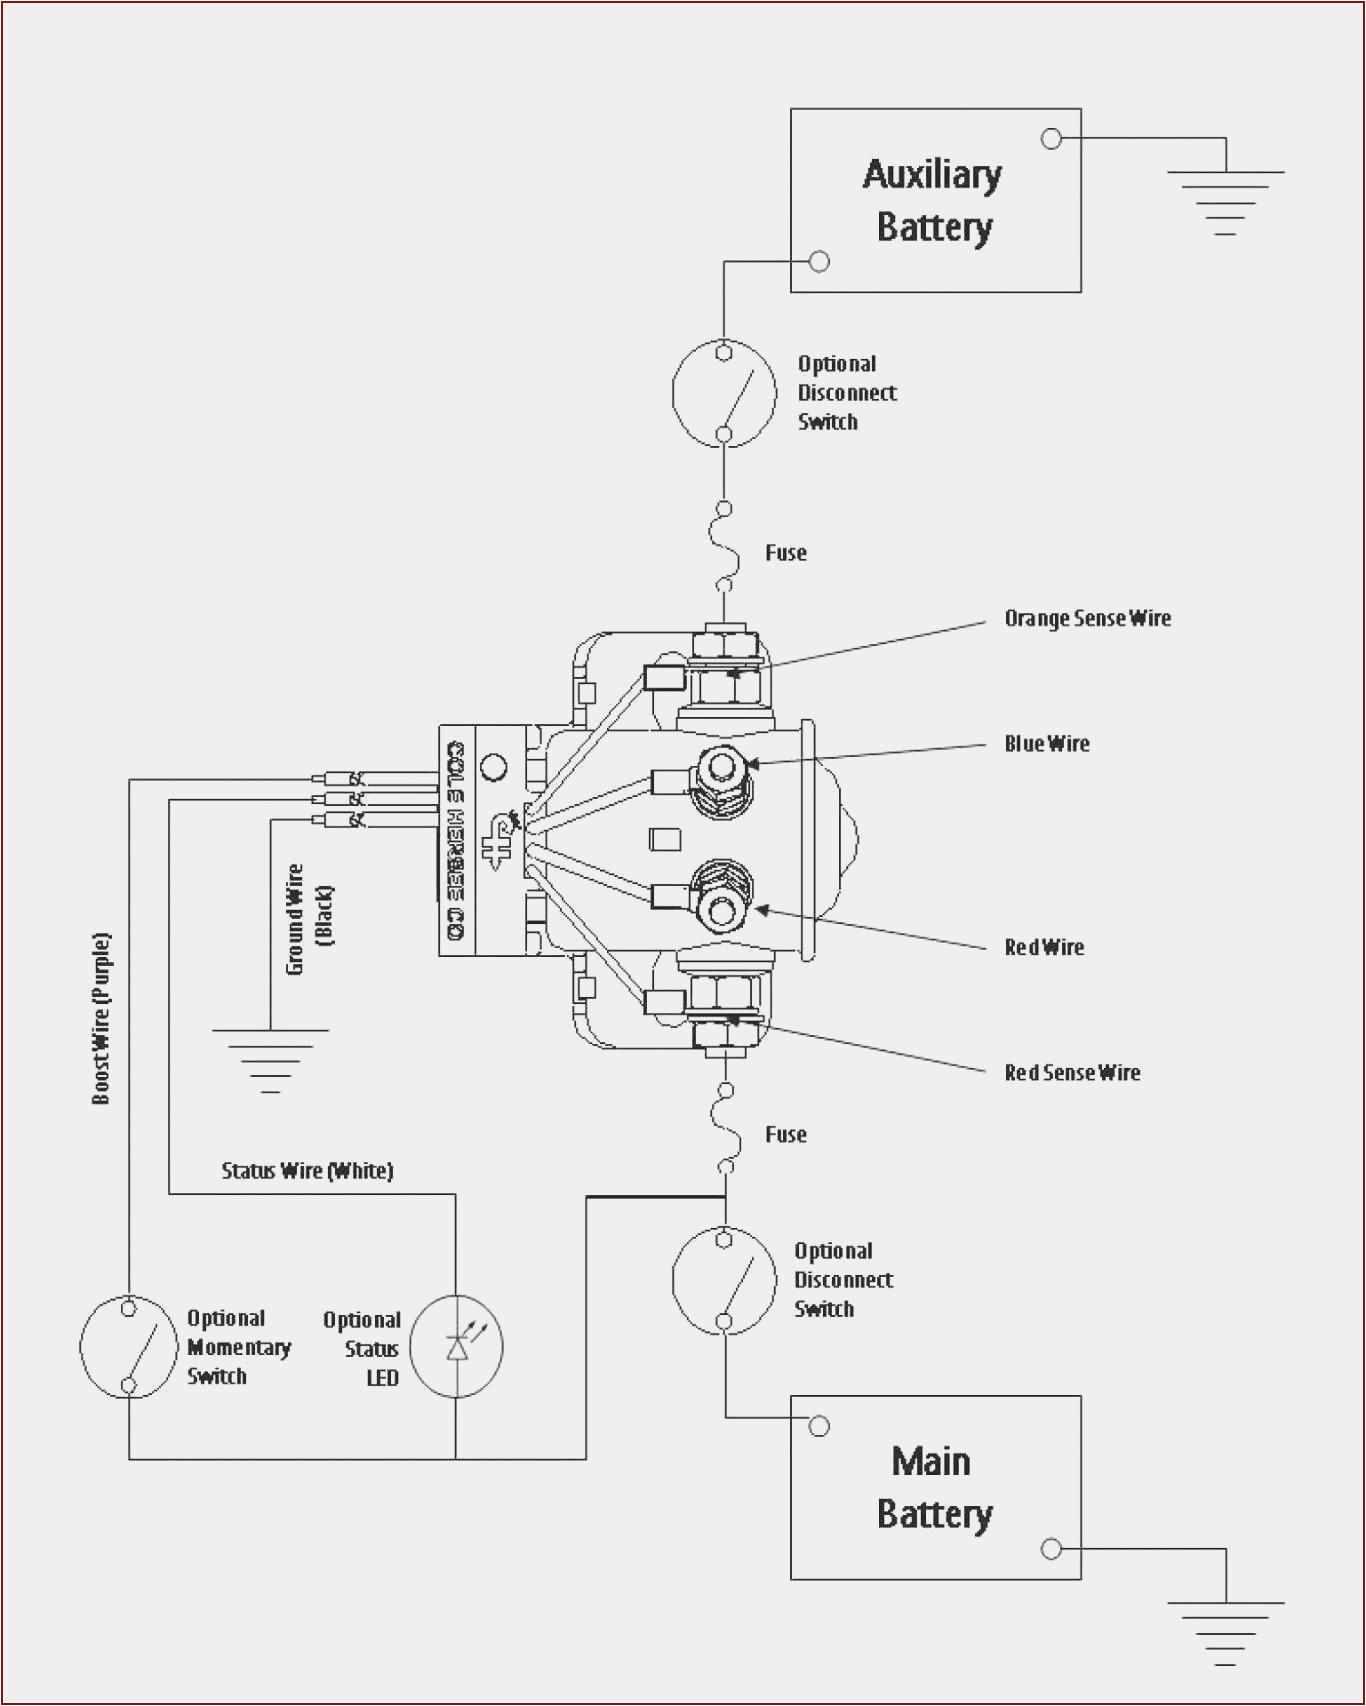 perko dual battery switch wiring diagram of perko dual battery switch wiring diagram jpg